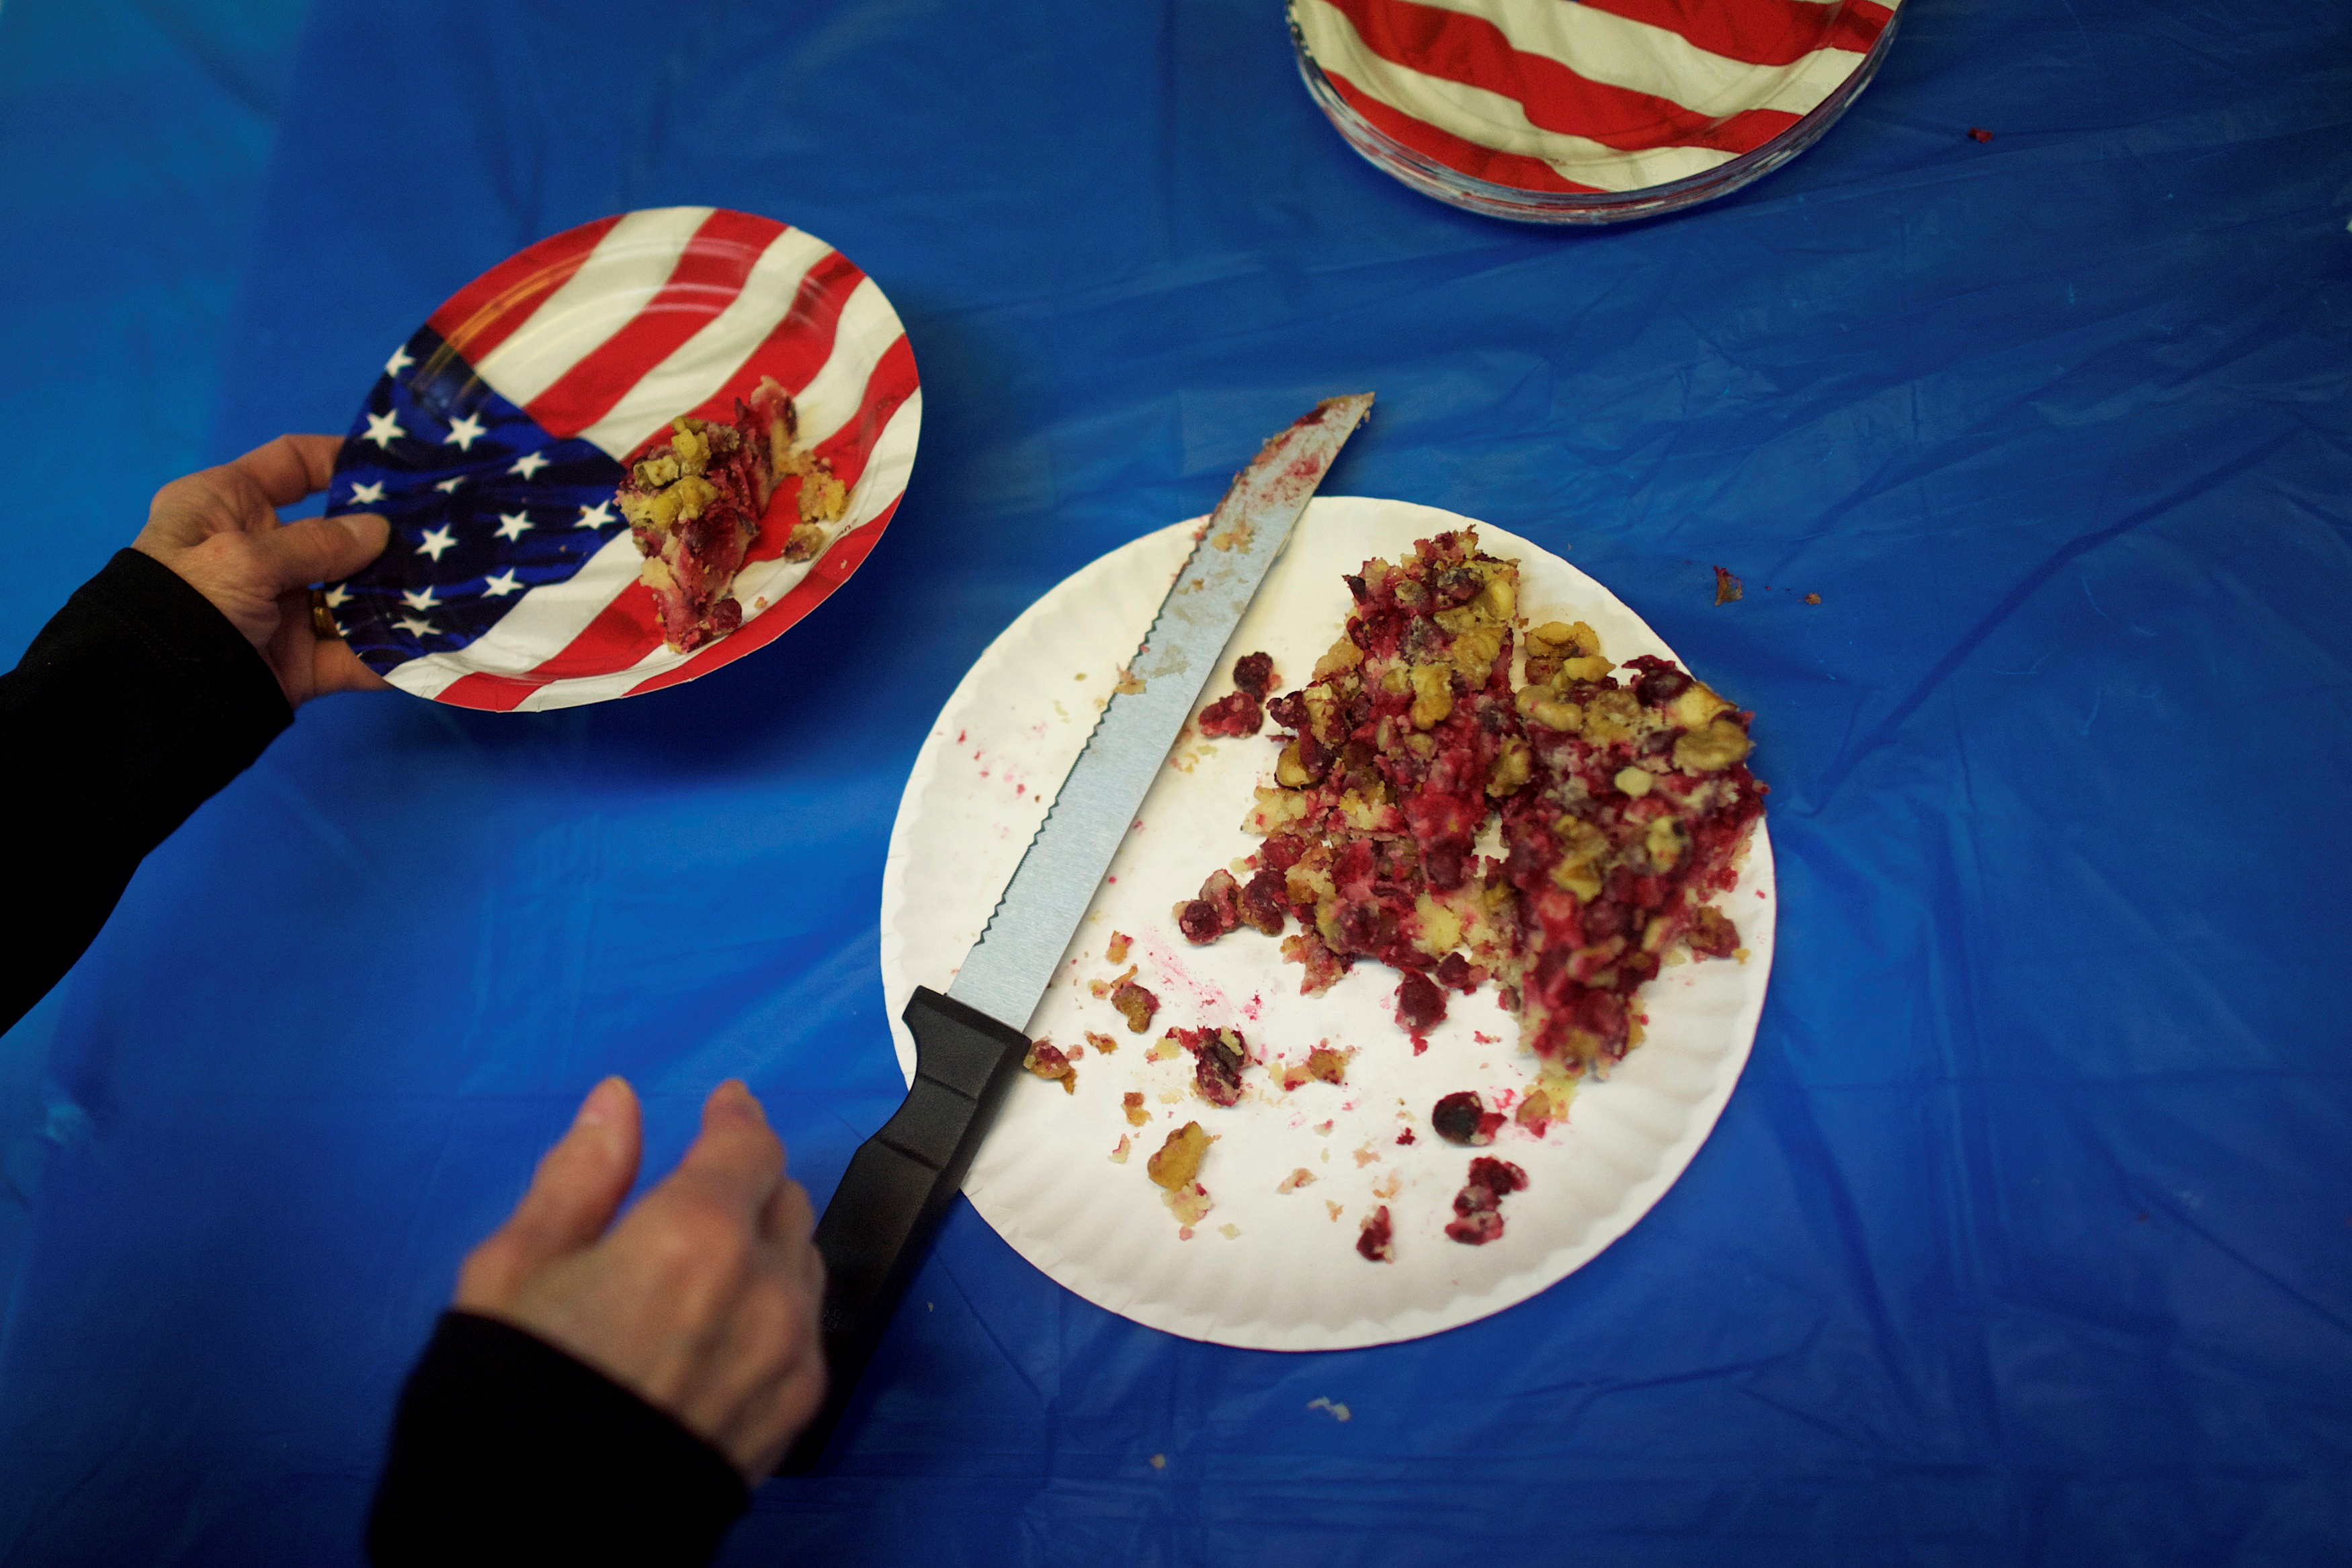 Volunteer Anne Scerbo places a piece of cranberry cake onto a U.S. flag themed paper plate during a break from phone calls at the York County Democratic Headquarters in York, Pennsylvania, November 4, 2014.  REUTERS/Mark Makela